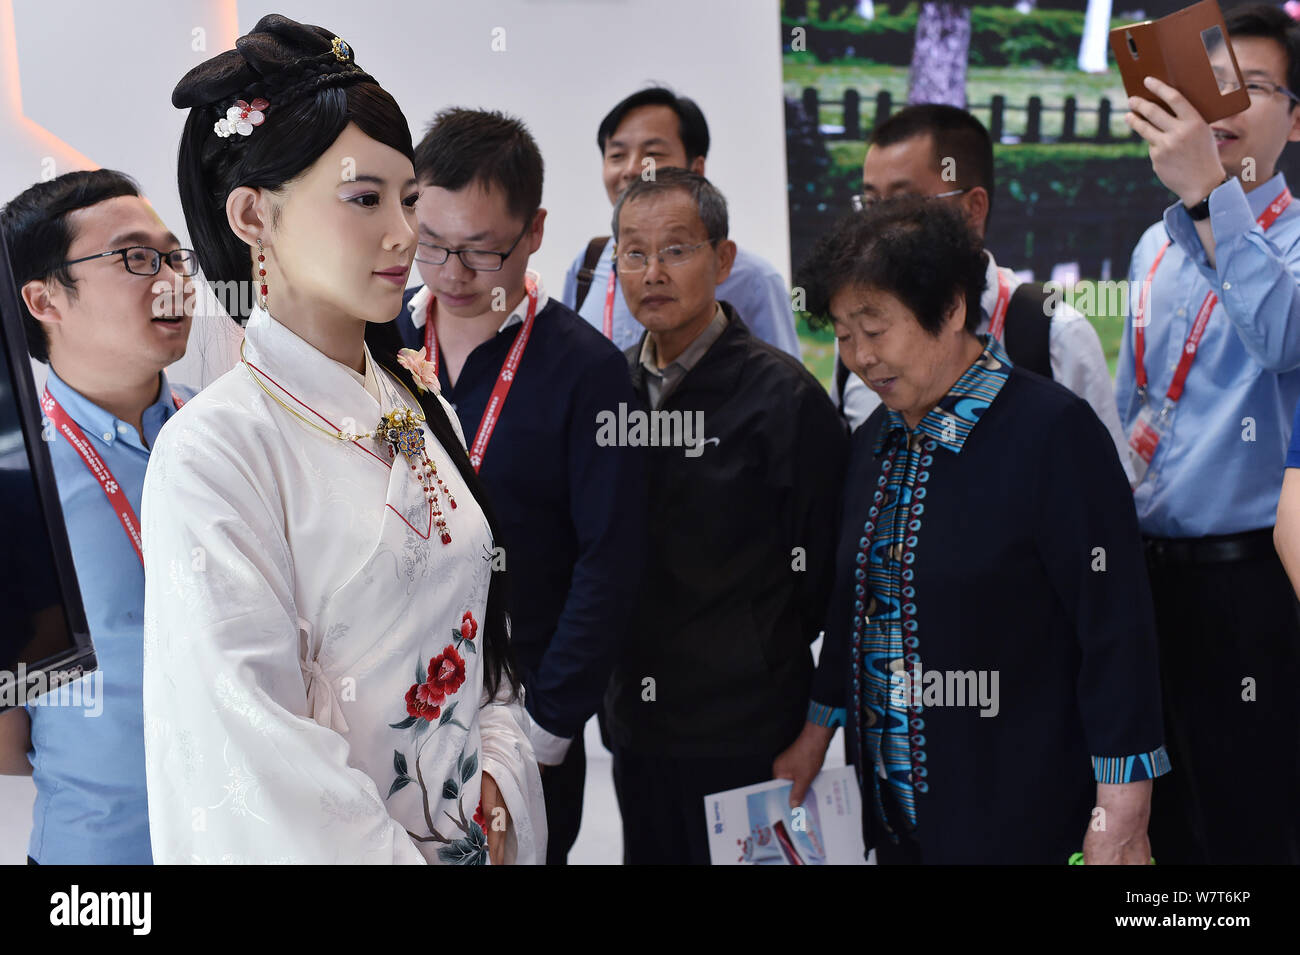 China's first advanced interactive robot Jia Jia, second left, interacts with visitors at the 10th Central China Investment and Trade Expo (Central Ch Stock Photo